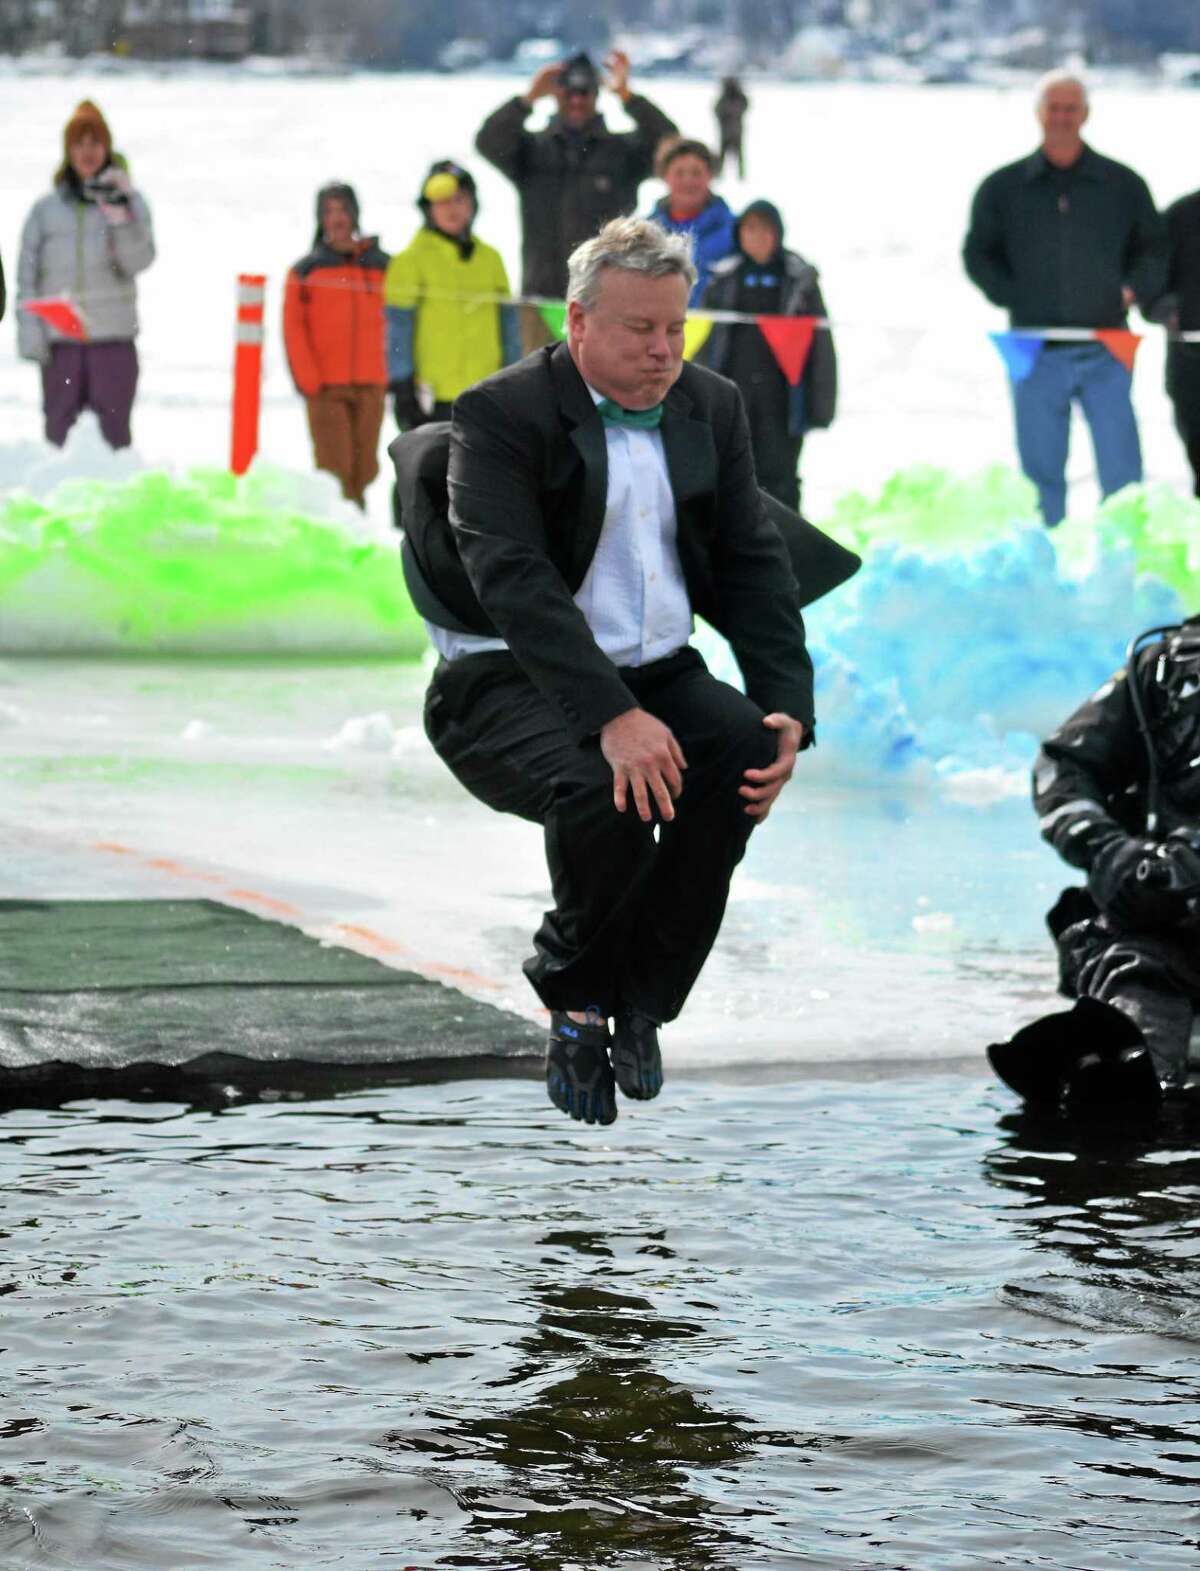 Winsted Town Manager Dale Martin dives in to Highland Lake as part of the Penguin Plunge, a fundraiser held annually in Winsted for Special Olympics.